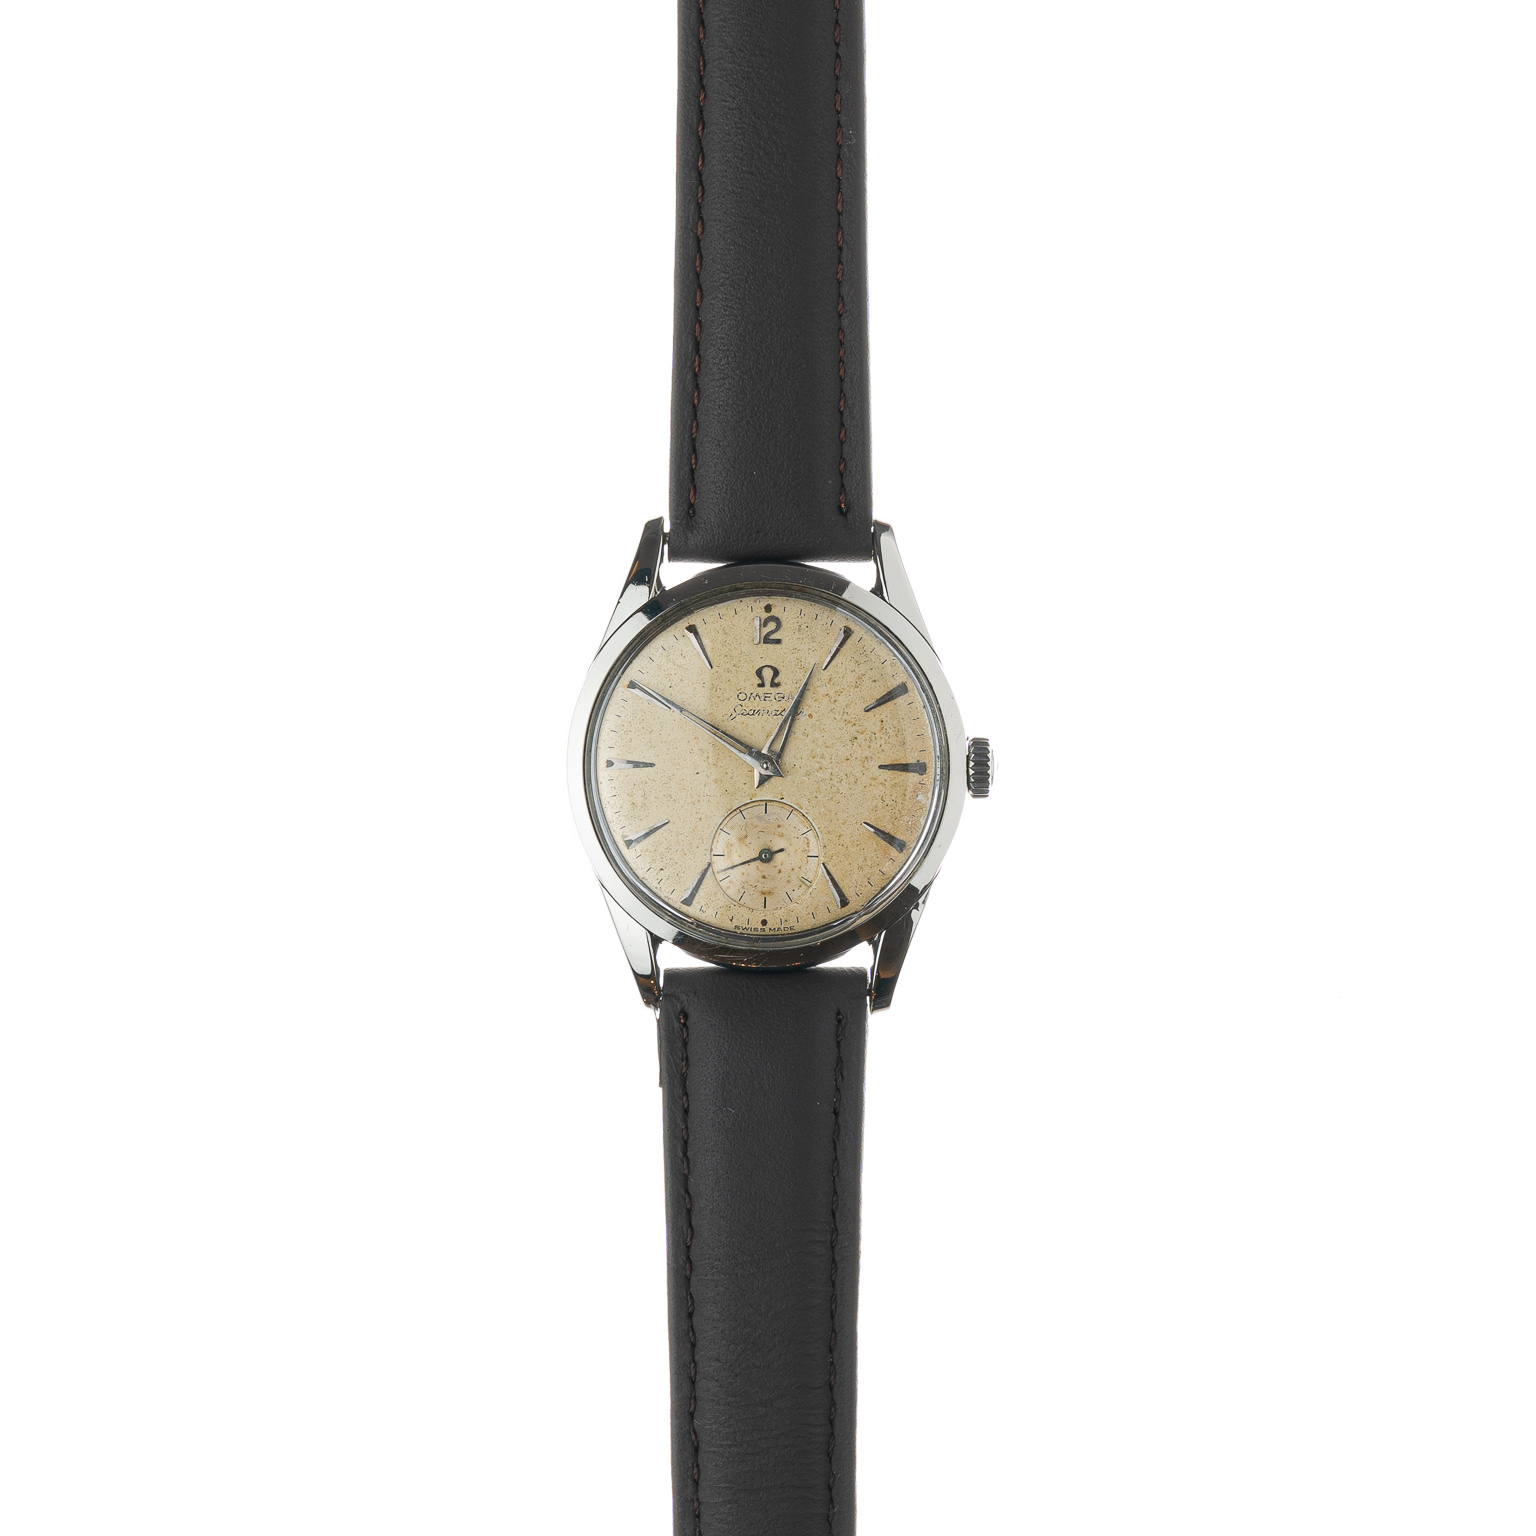 Omega Seamaster 2937-5 from 1959 watch